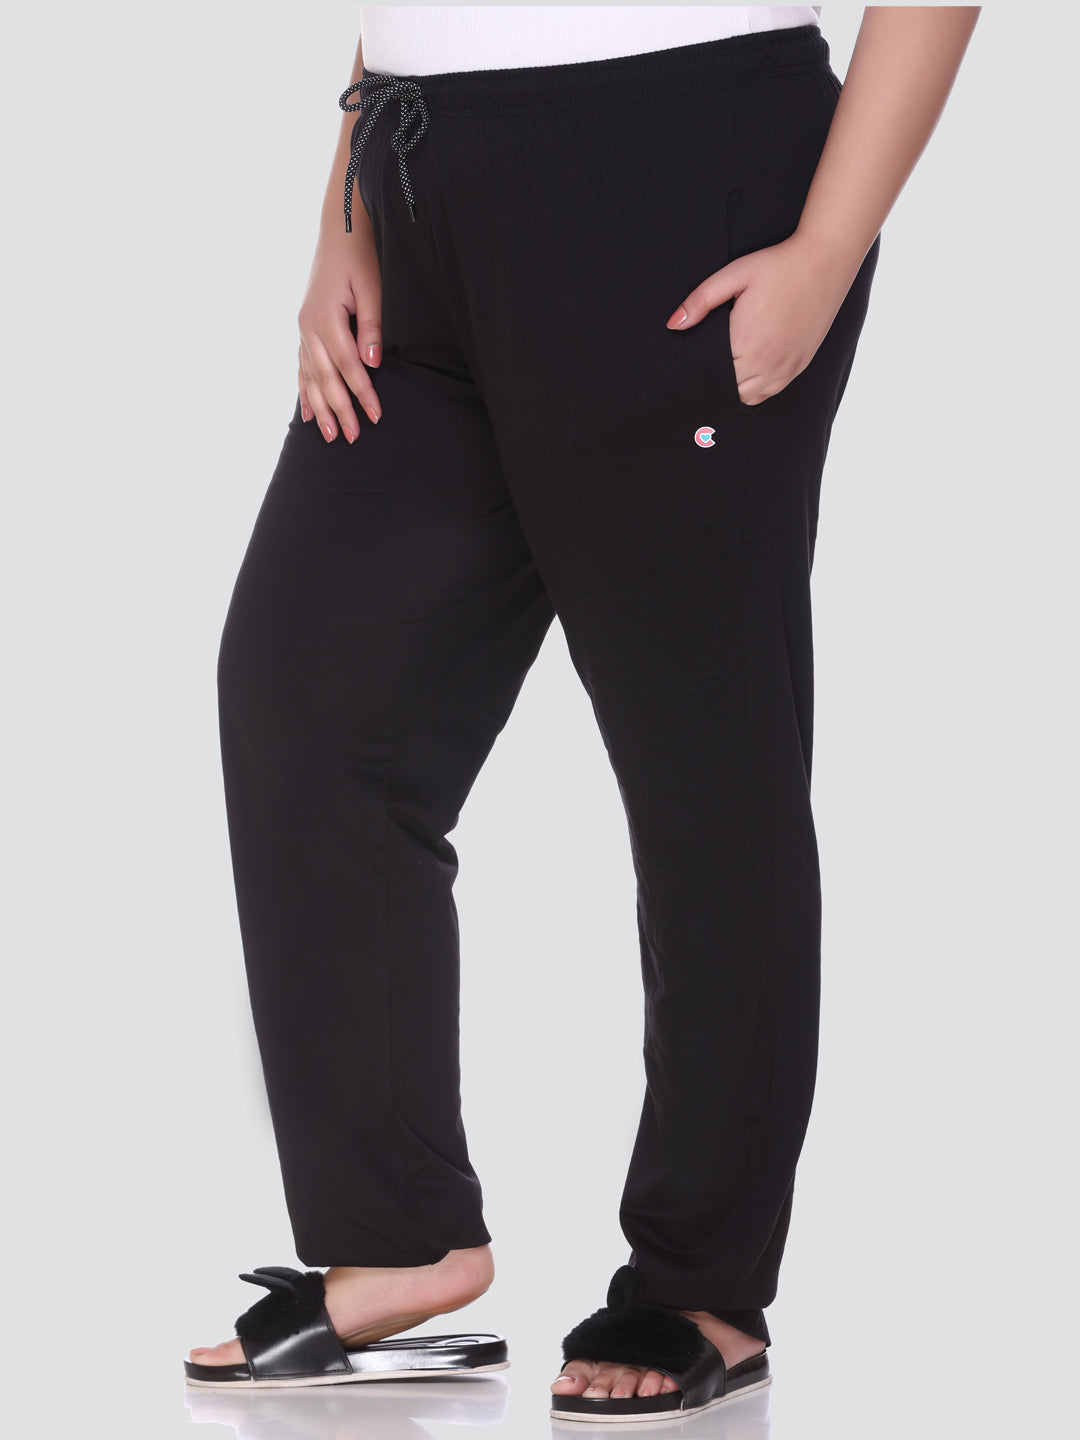 White Women Track Pants - Buy White Women Track Pants online in India